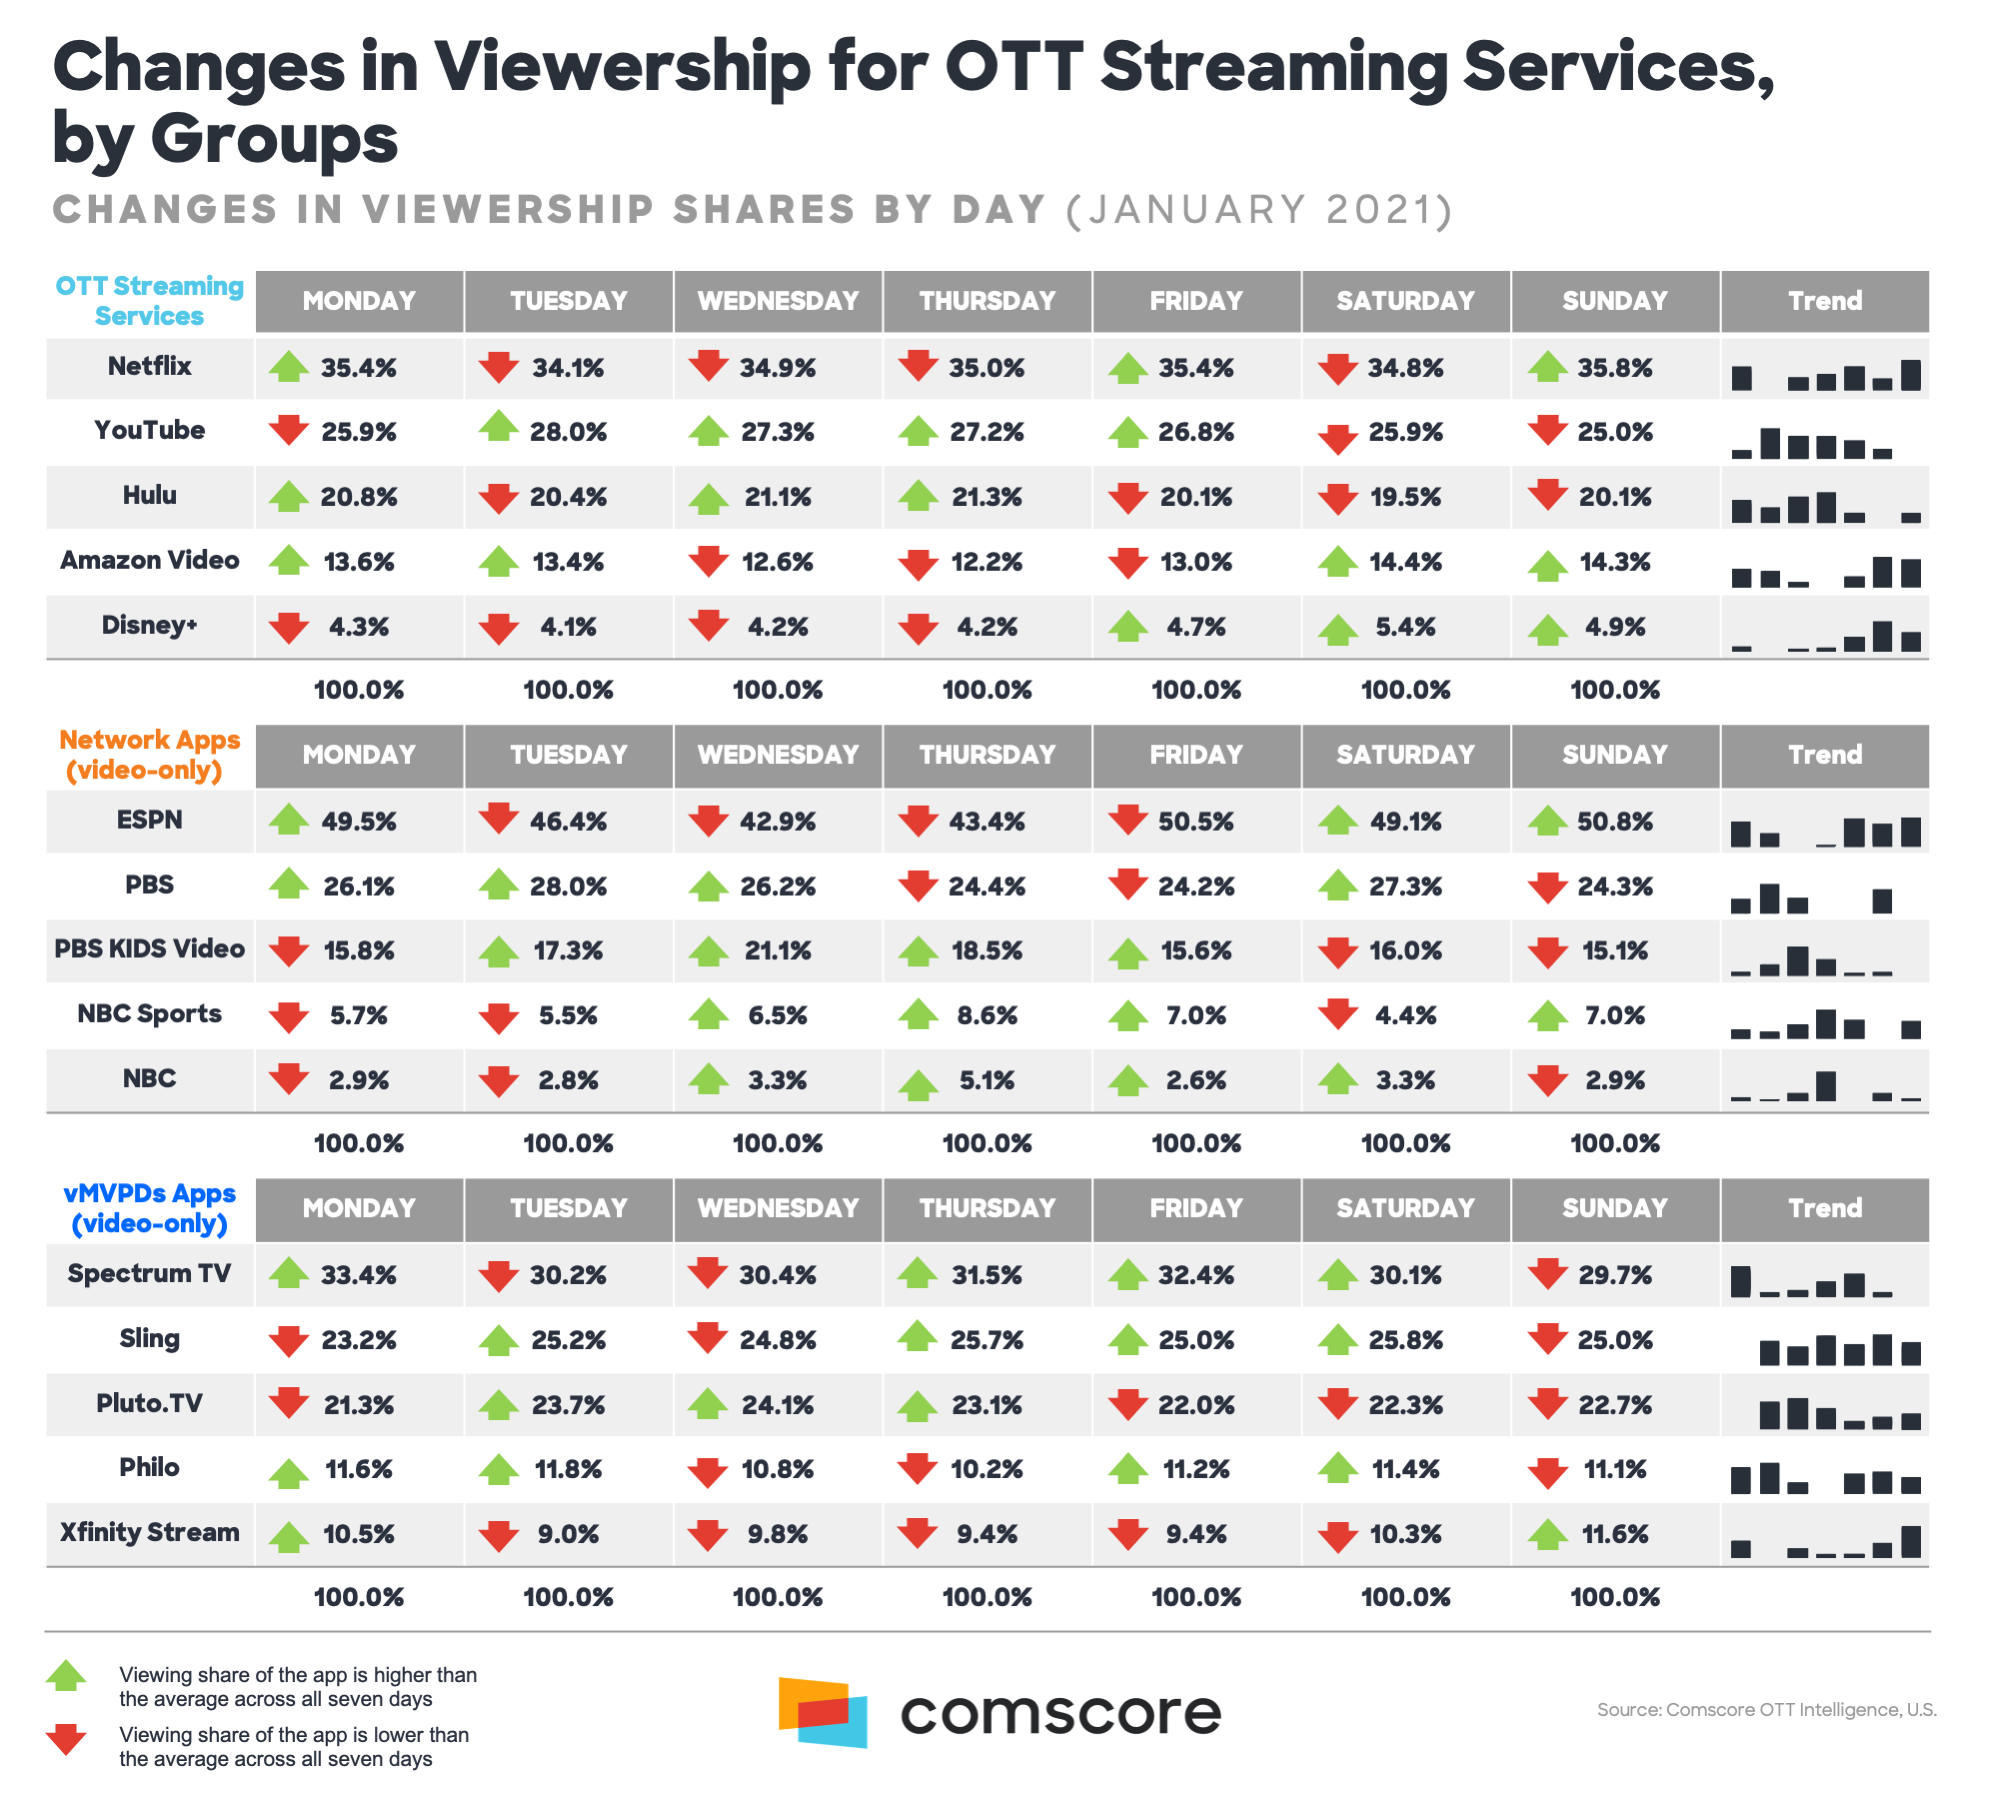 Changes in Viewership for OTT Streaming Services by Groups